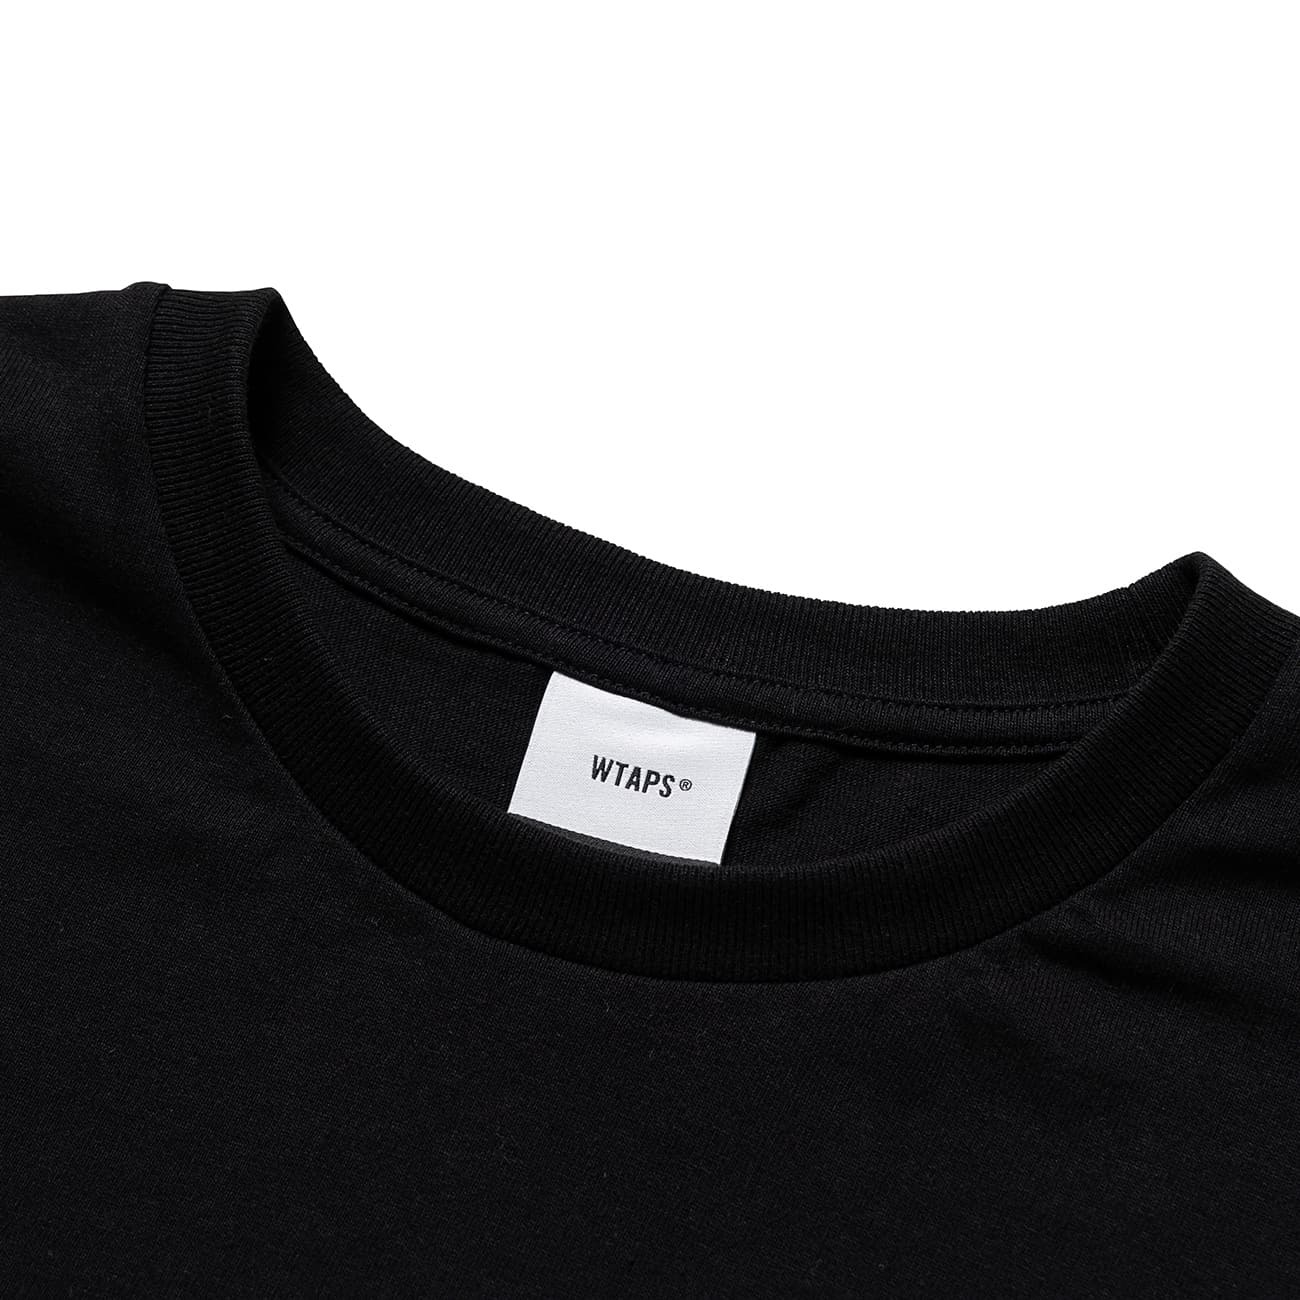 WTAPS 231ATDT-STM10S SIGN / SS / COTTON